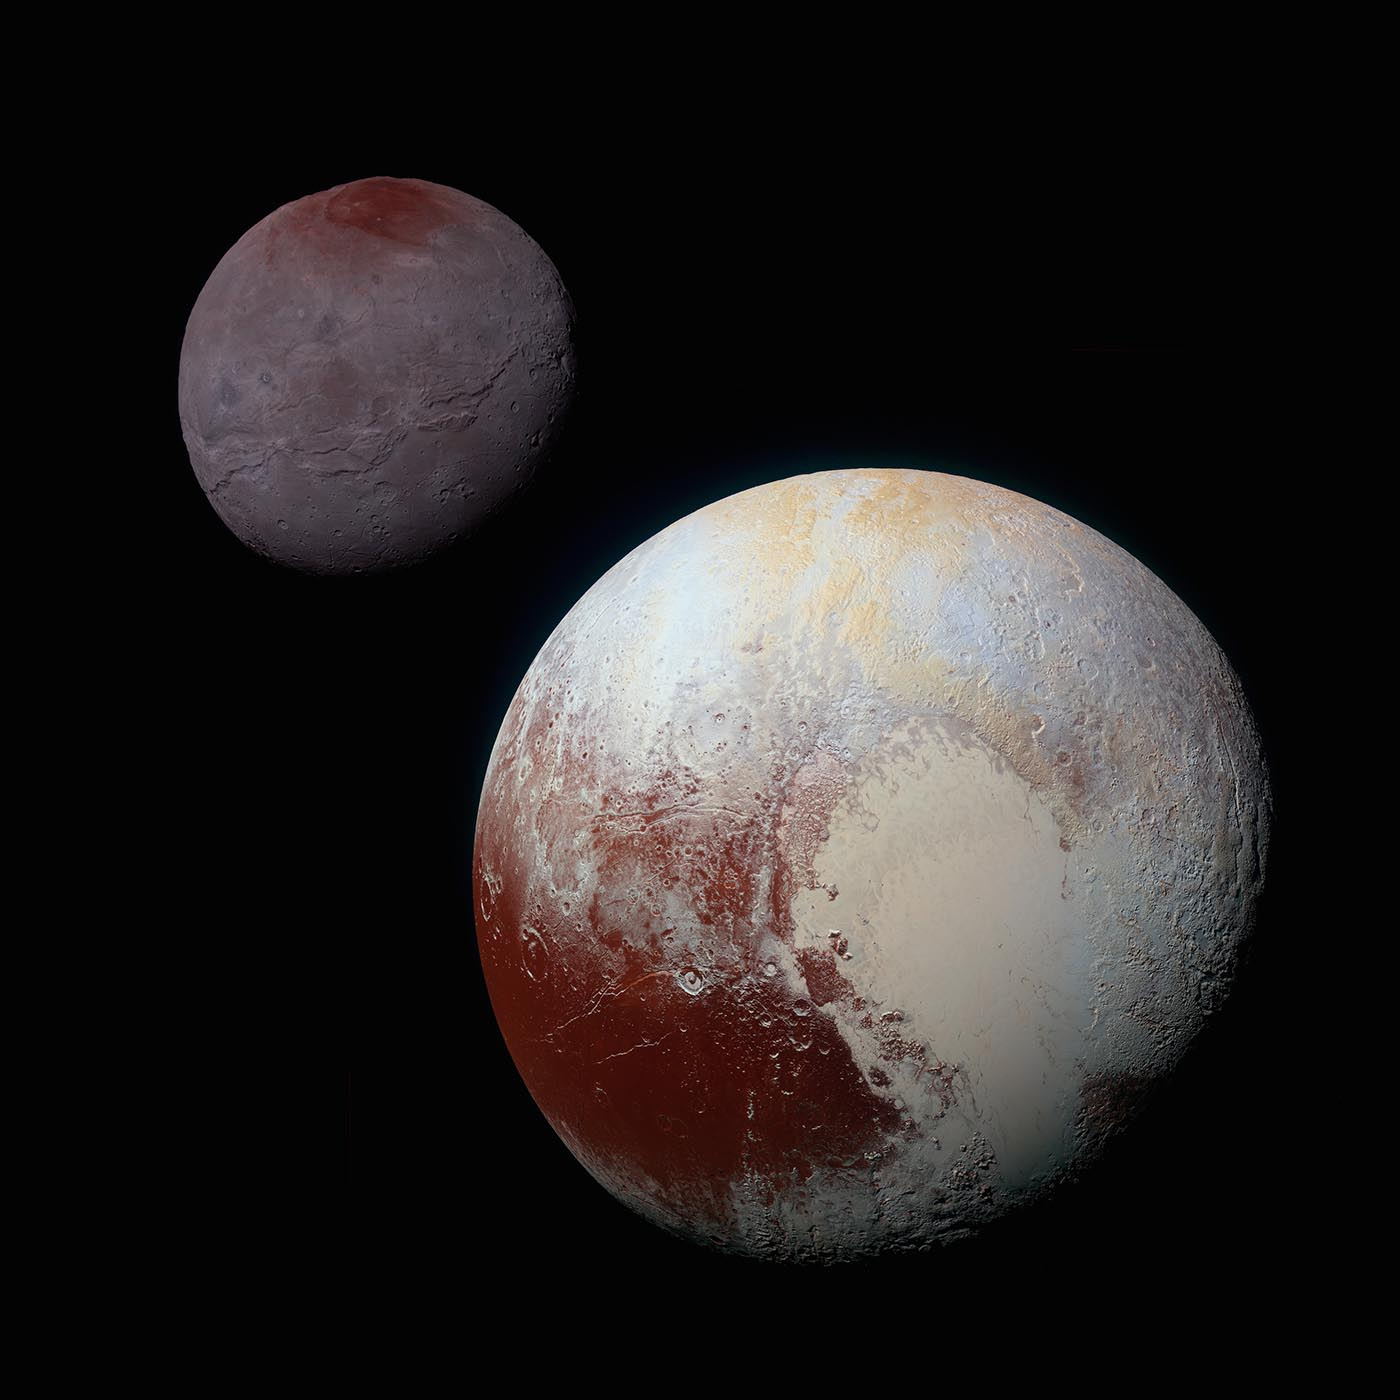 Close-up view of Pluto shows the dwarf planet has a light-colored patch shaped like a heart. Charon is shown behind Pluto.